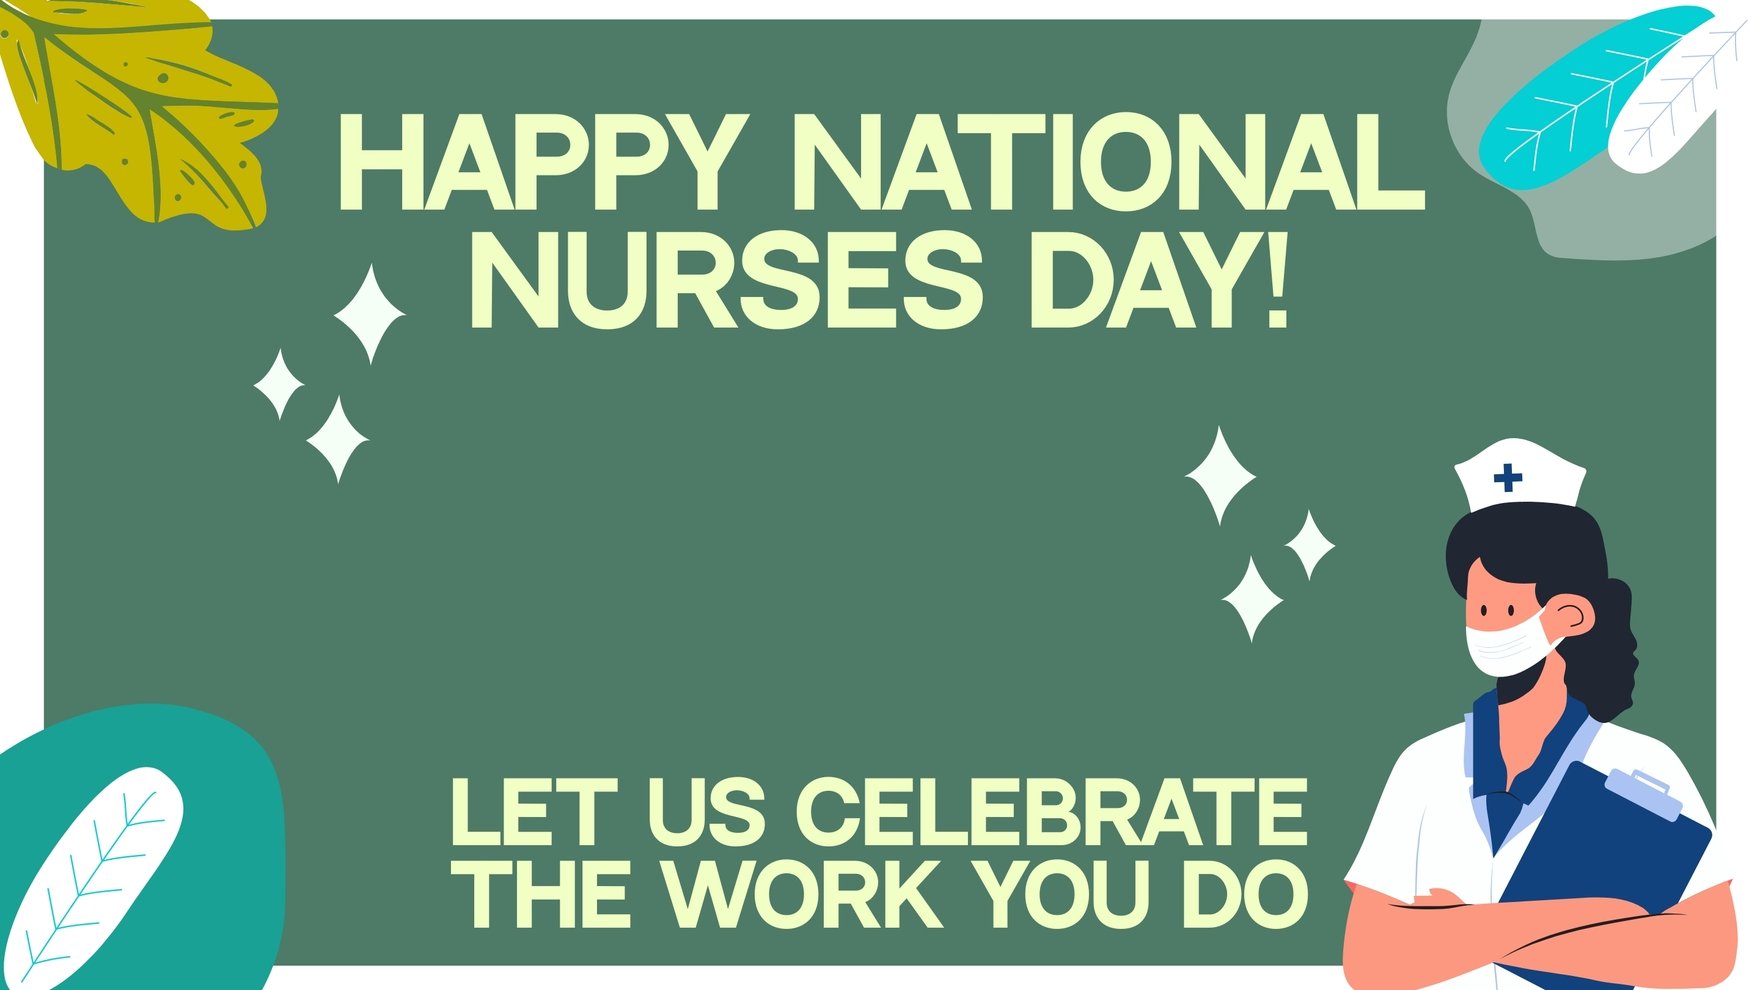 National Nurses Day Greeting Card Background